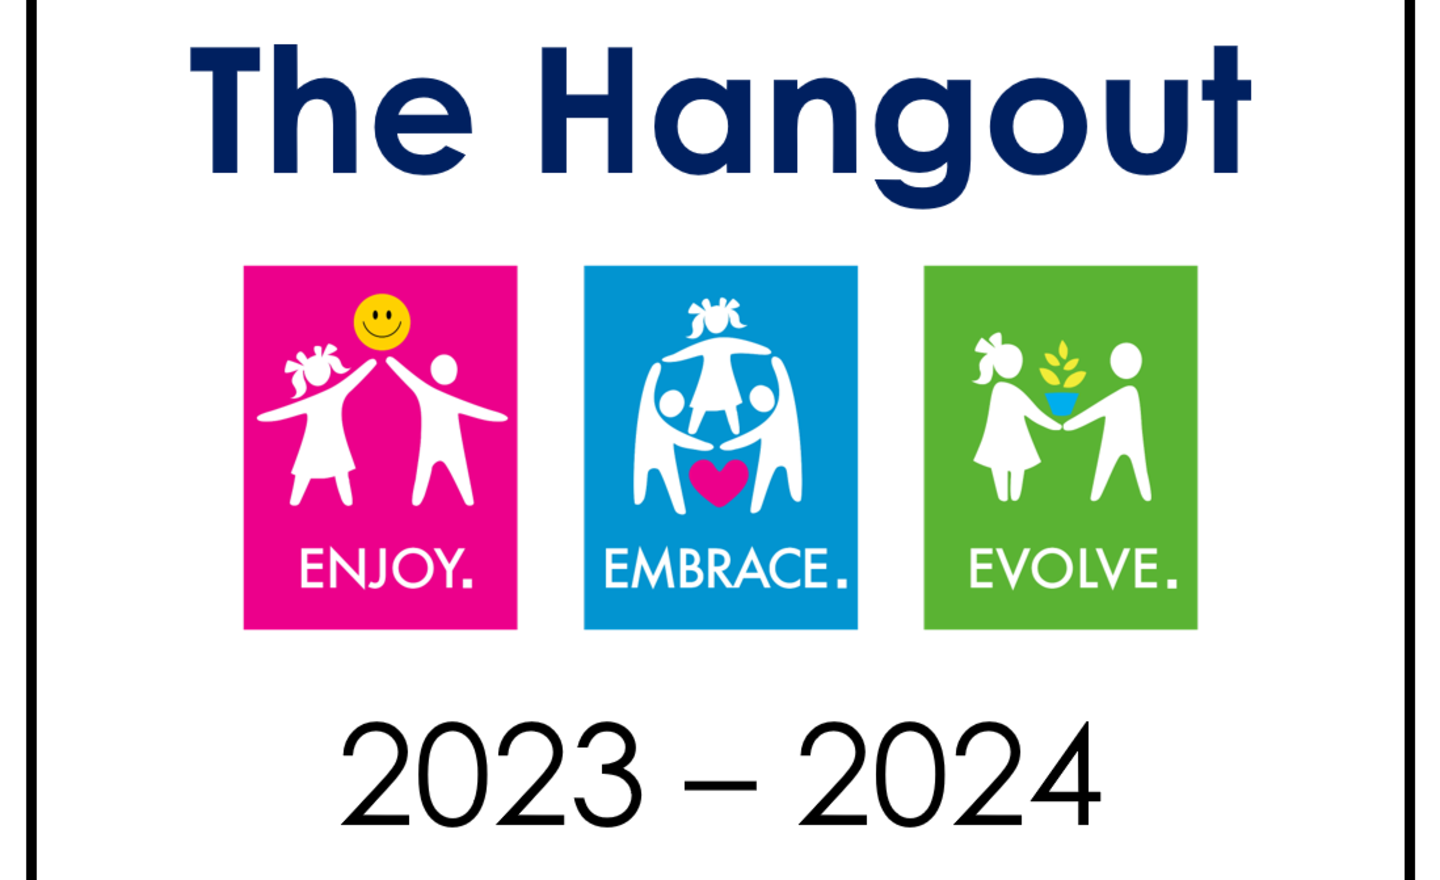 Image of The Hangout 2023 - 2024